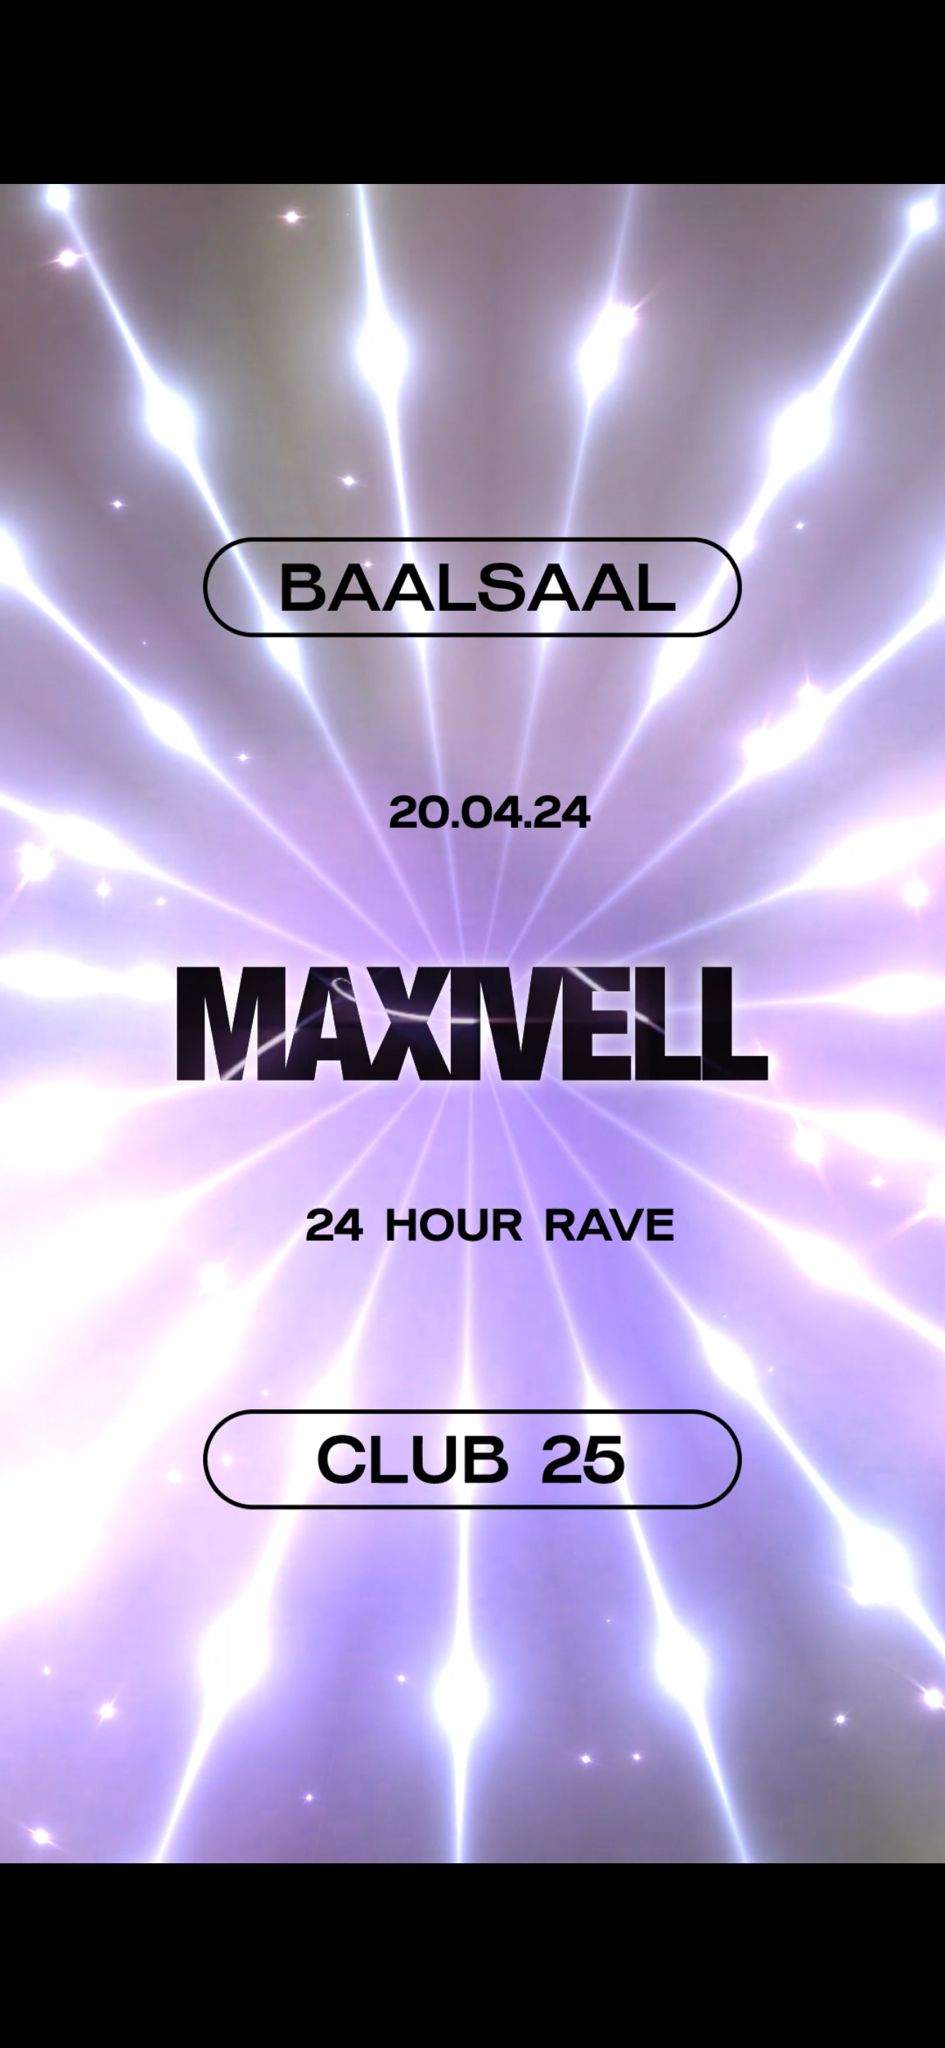 MAXIVELL 24 H Rave - フライヤー表